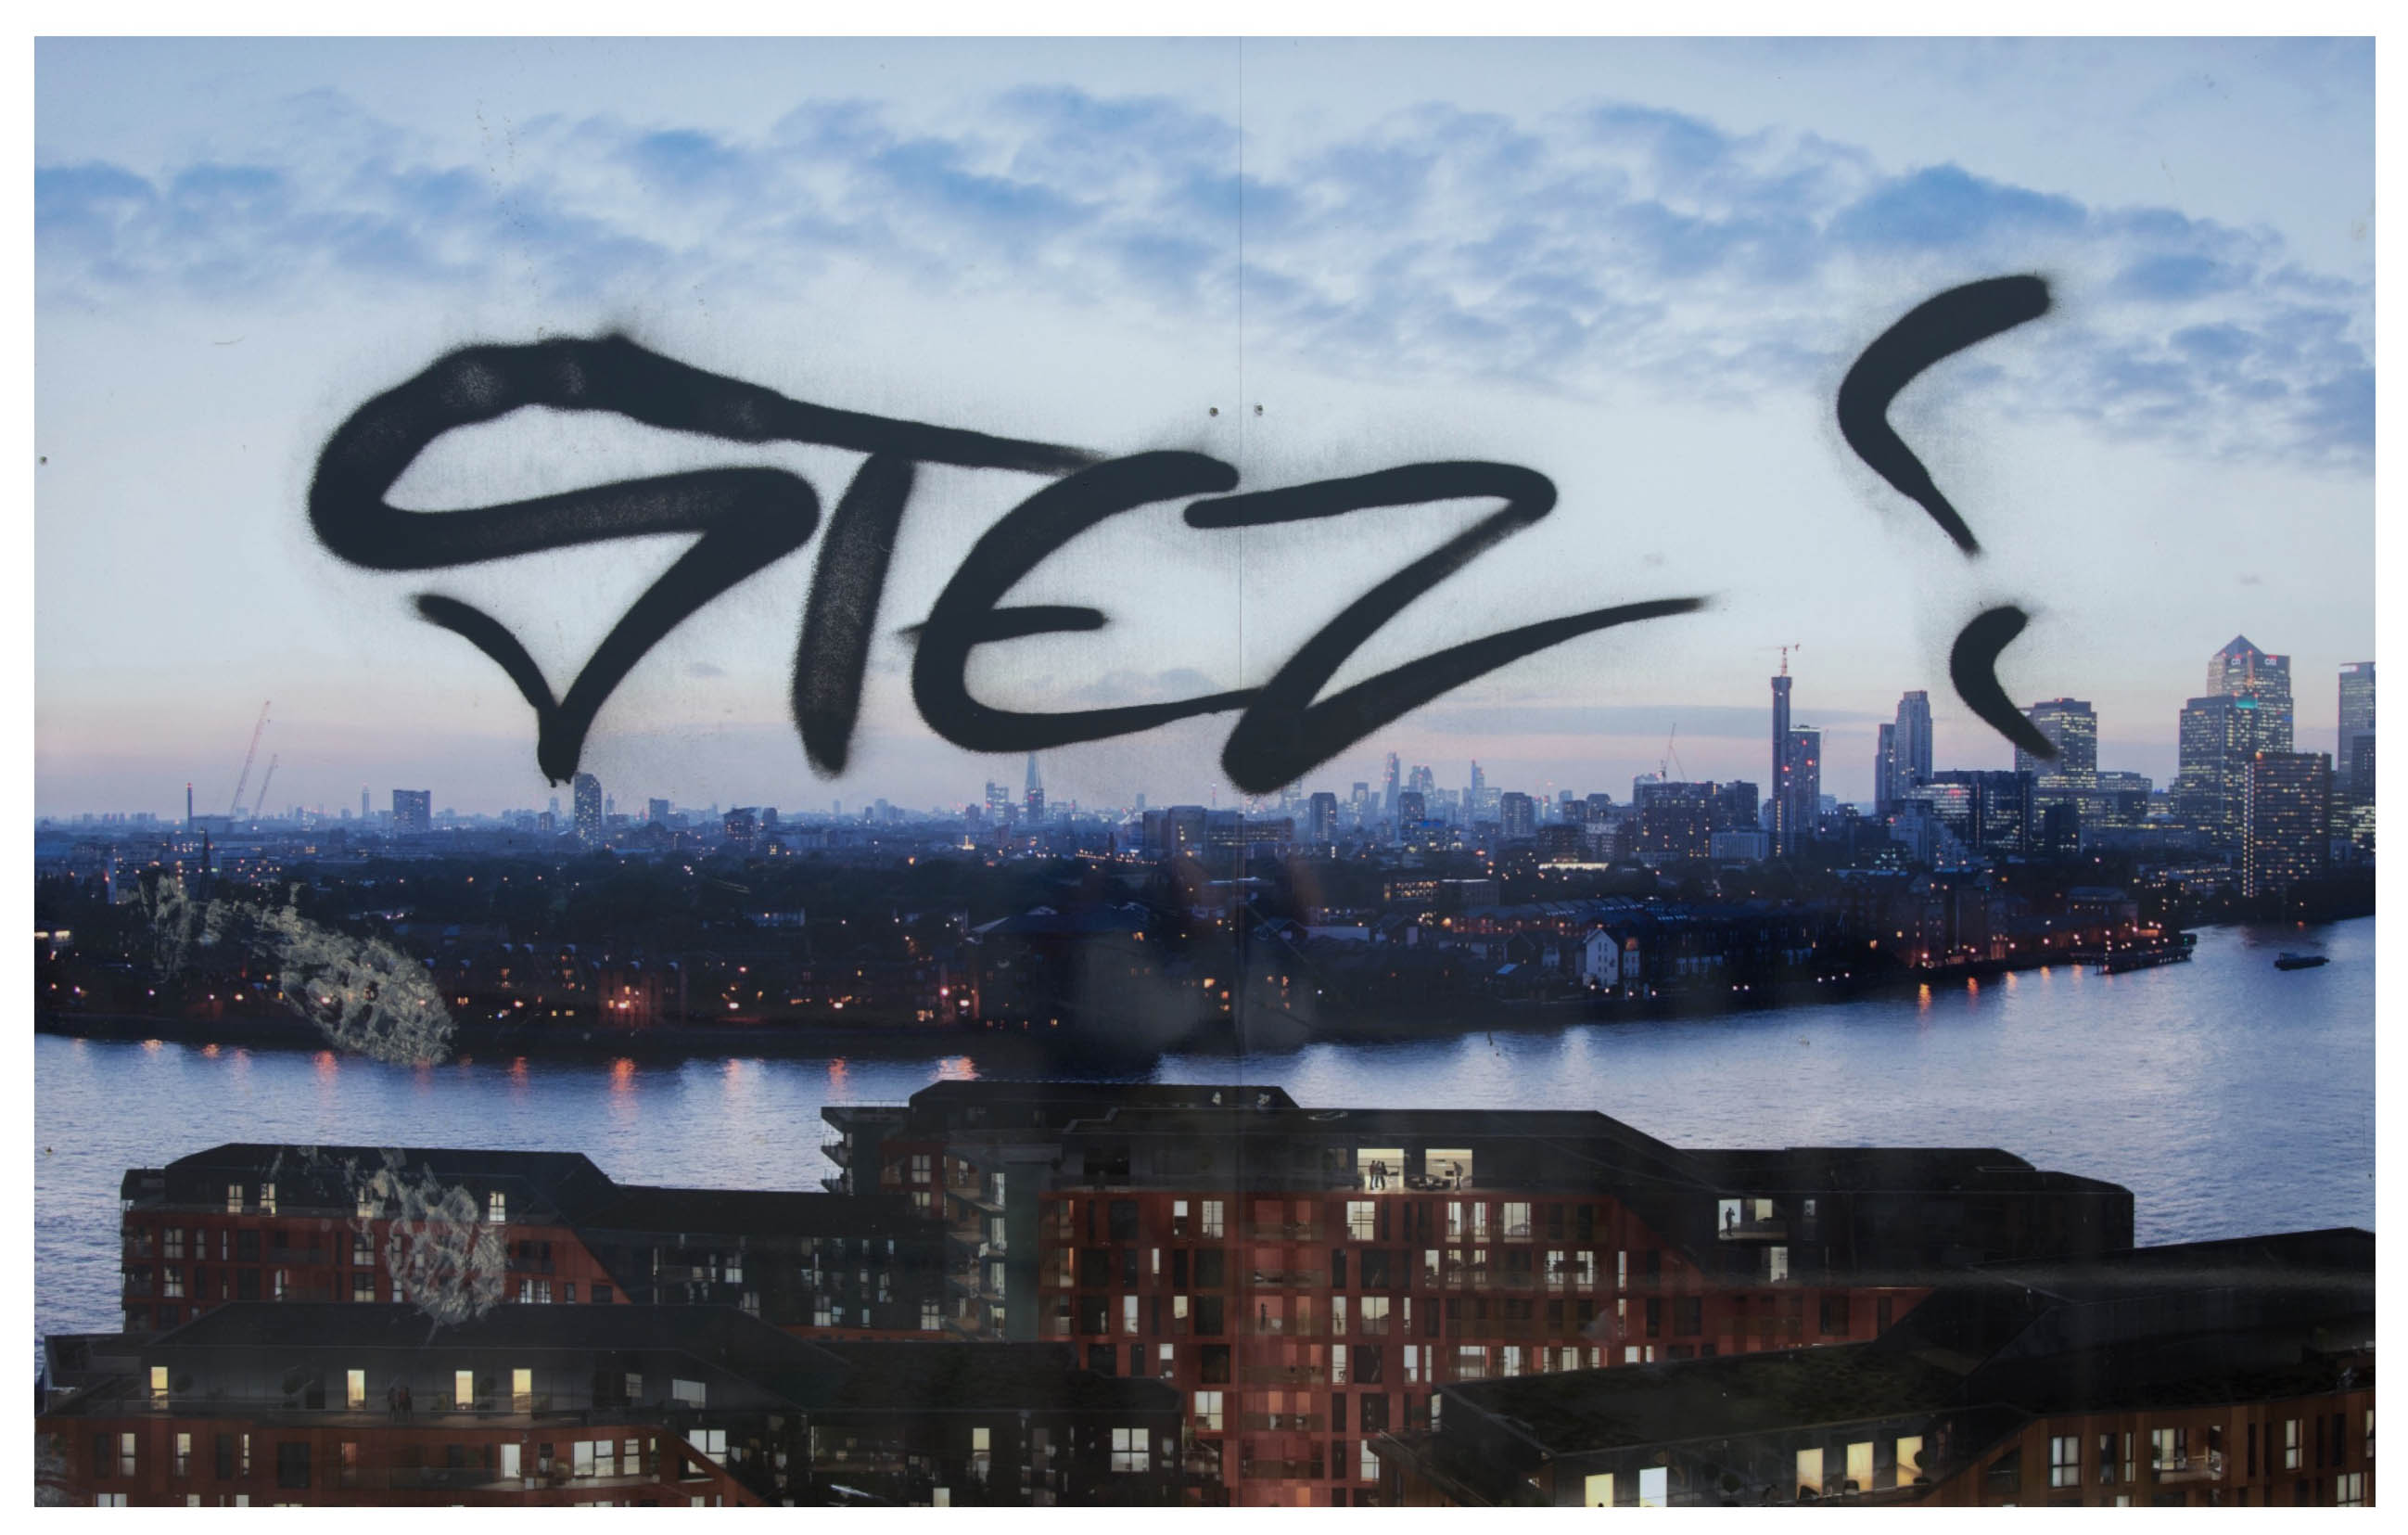 an architectural mockup provides a view over the Thames and part of London, someone has spray canned STEZ! over it